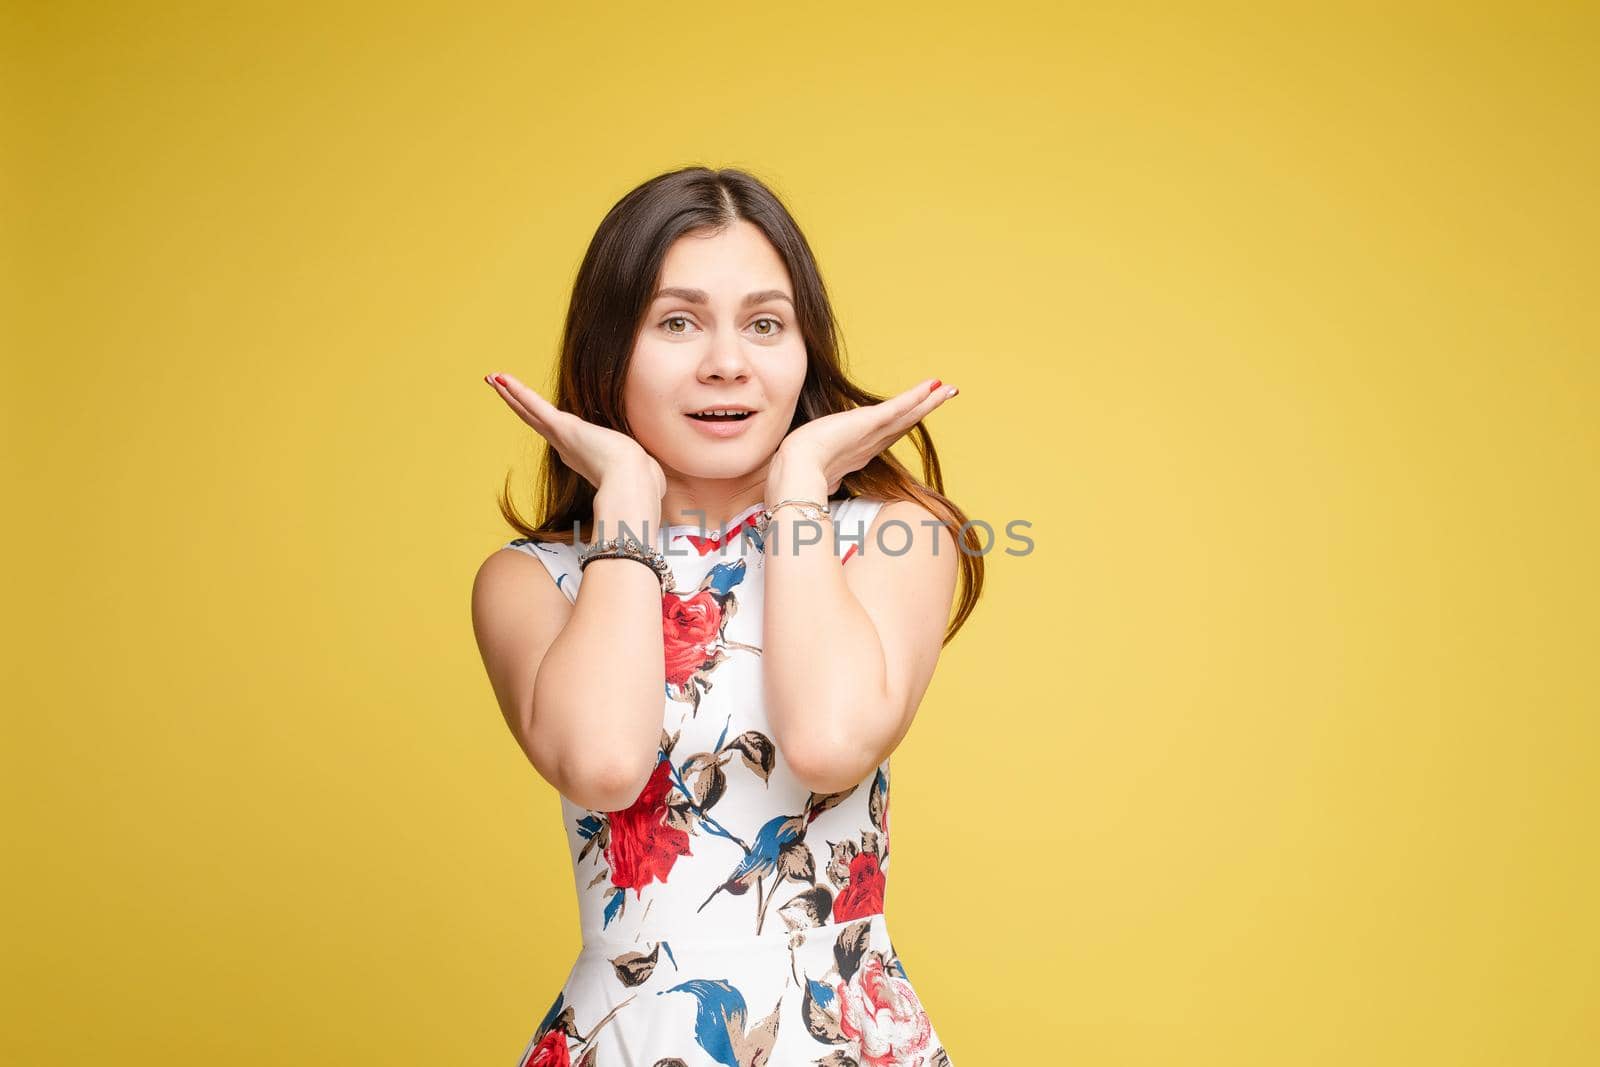 Front view of surprised young girl in bright dress looking at camera on yellow isolated background in studio. Funny amazed female with open eyes shouting. Concept of shock and happiness.